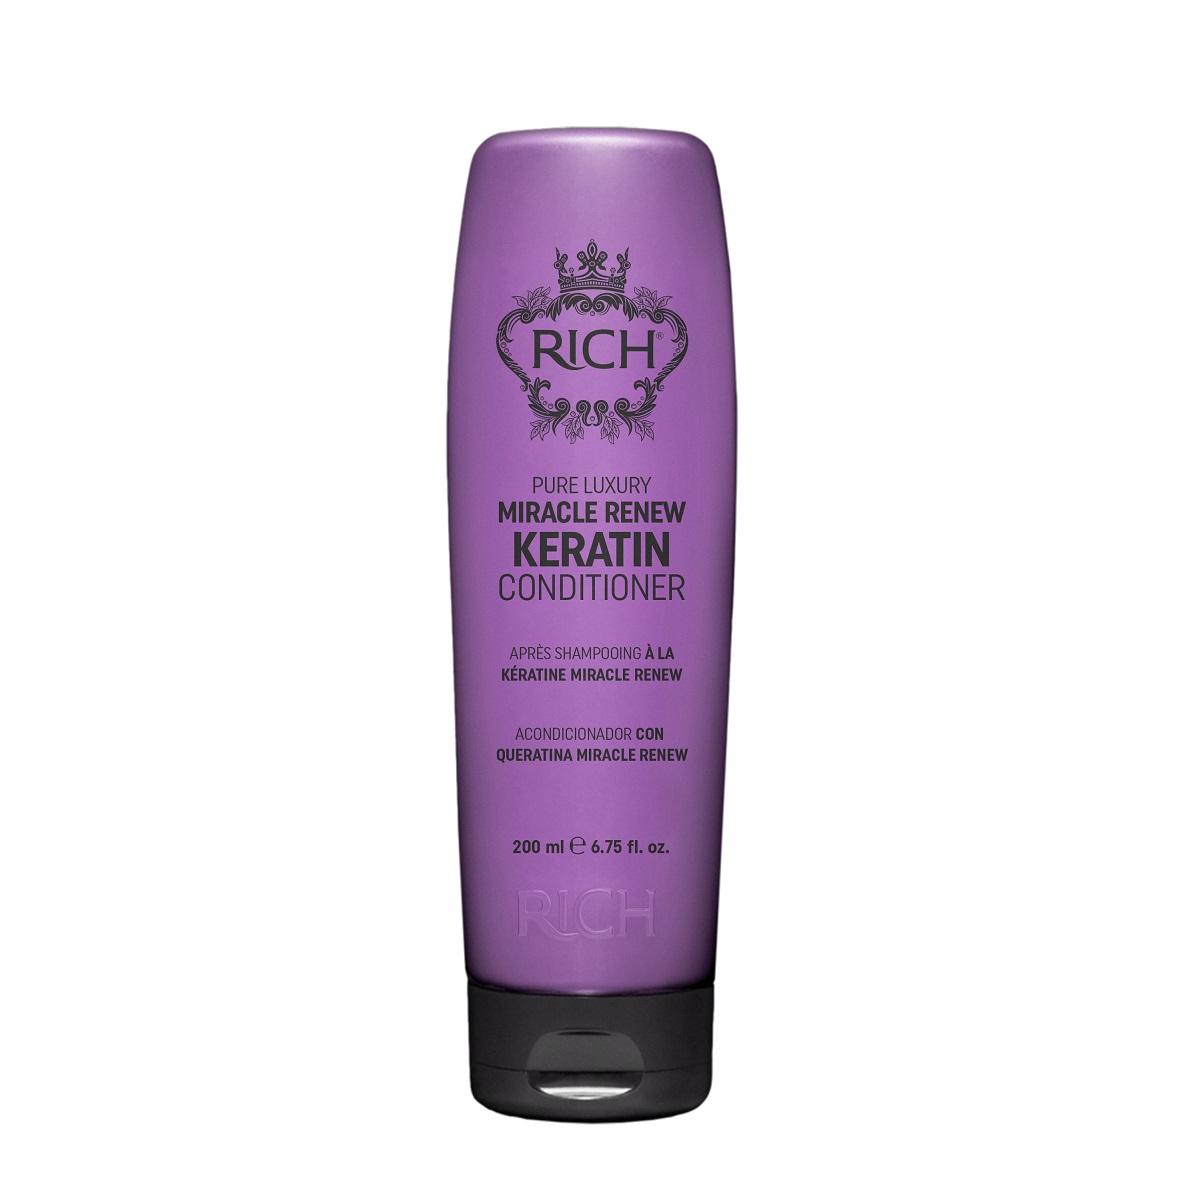 Rich Pure Luxury Miracle Renew Keratin Conditioner Taastav palsam